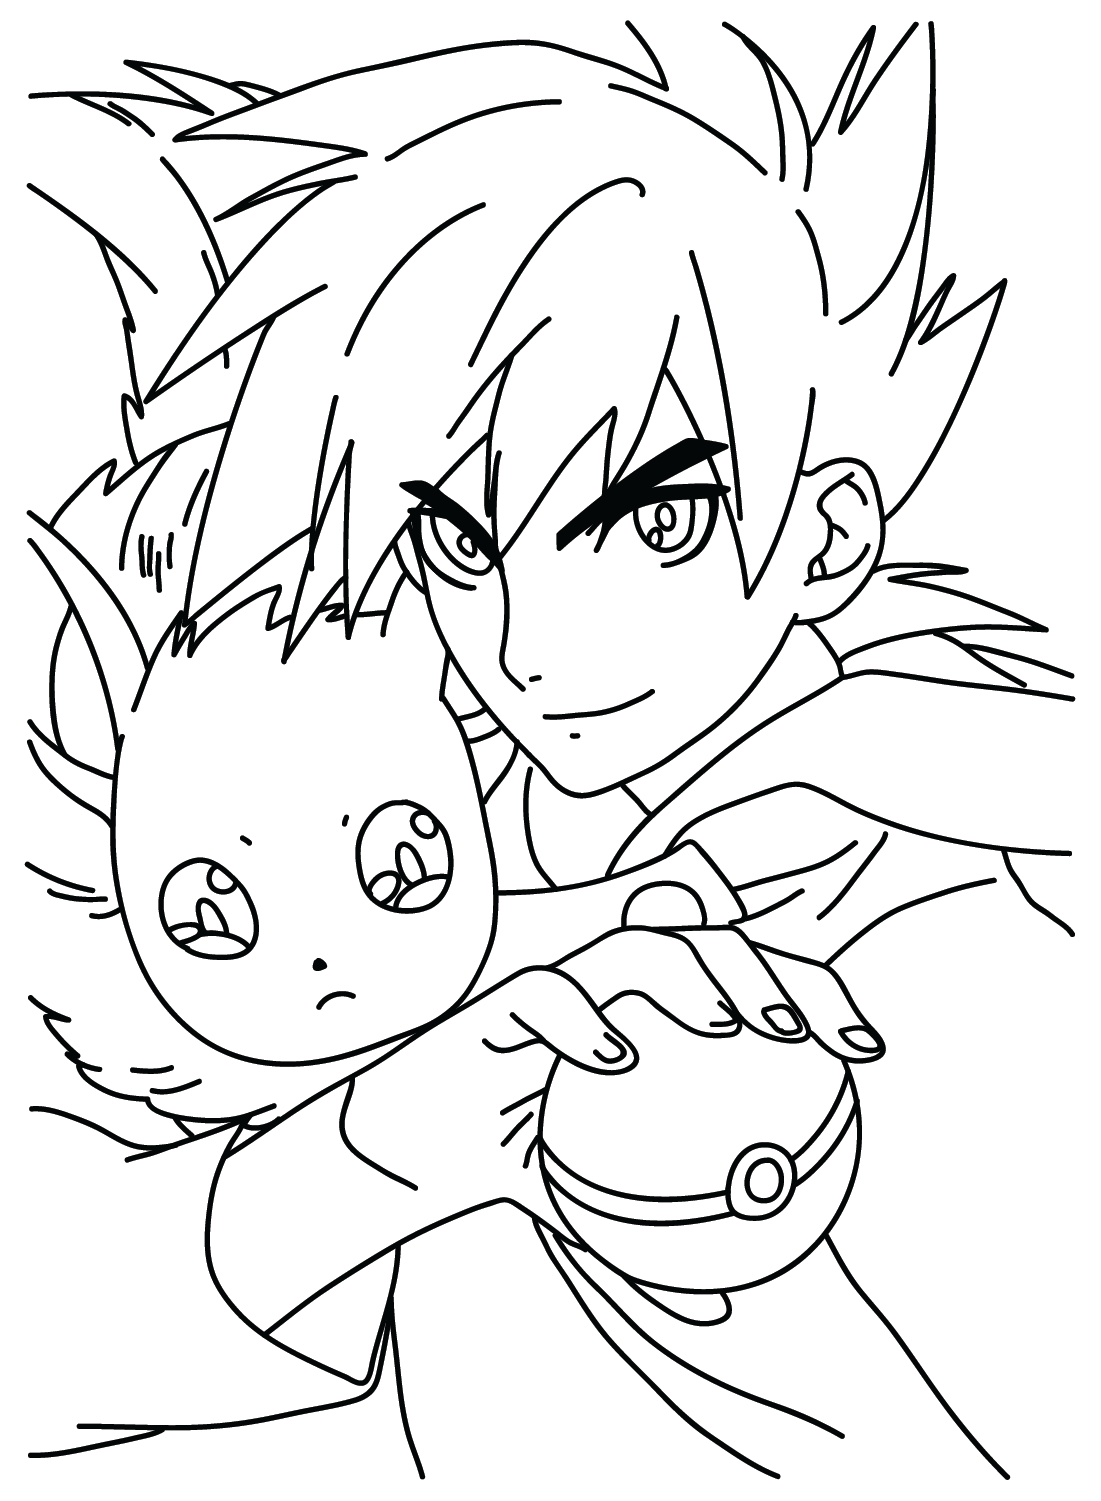 Eevee and Gary Oak of Pokemon to Color from Gary Oak Pokemon